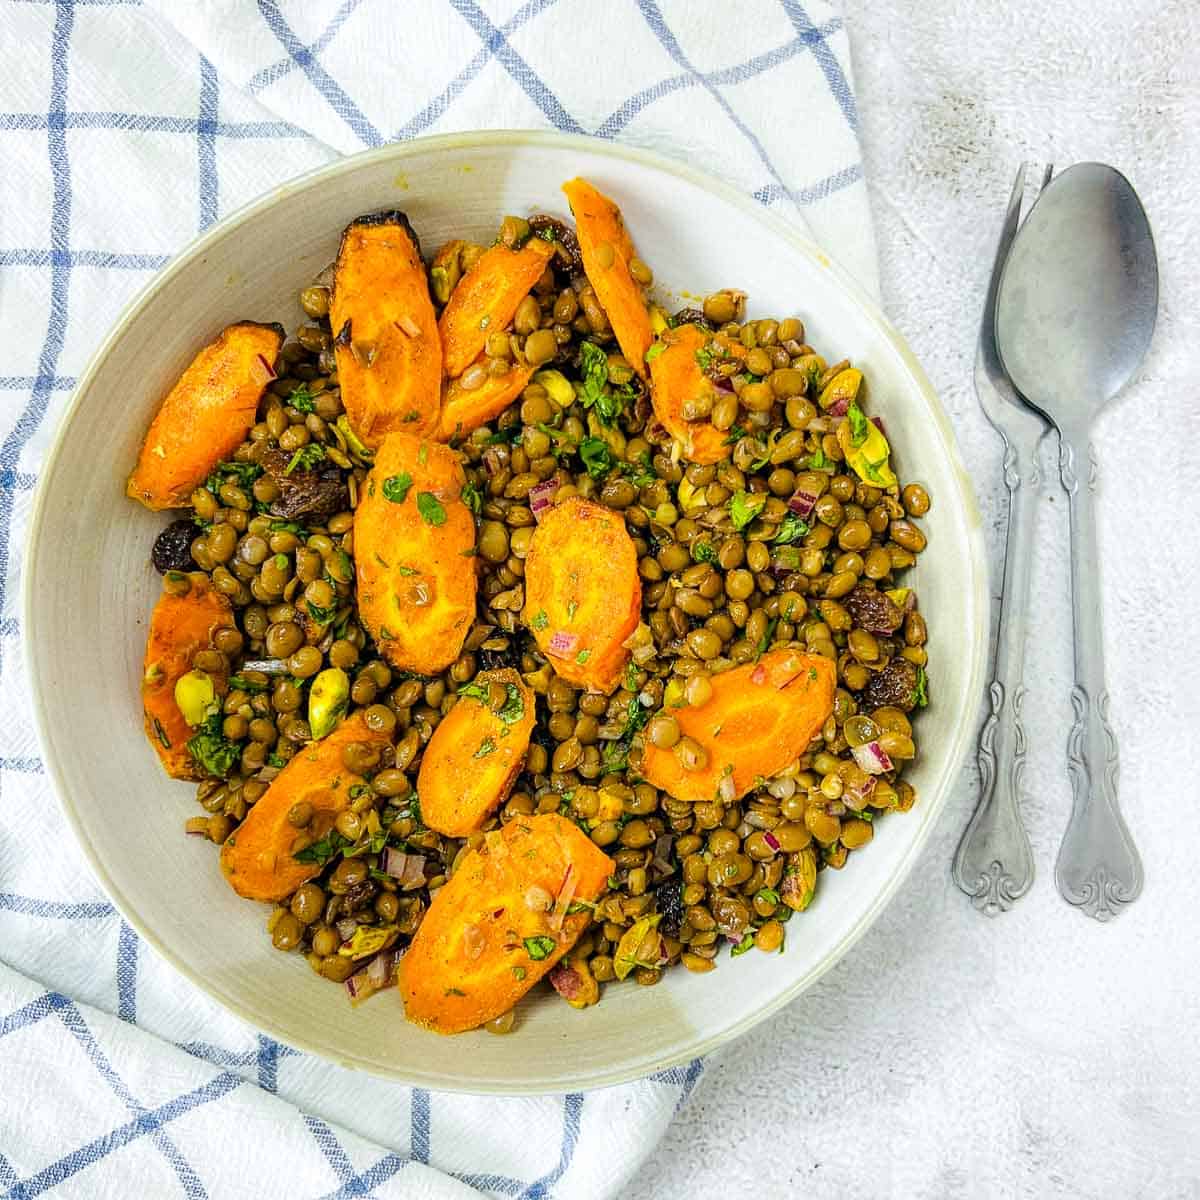 Moroccan lentil and carrot salad in white bowl.